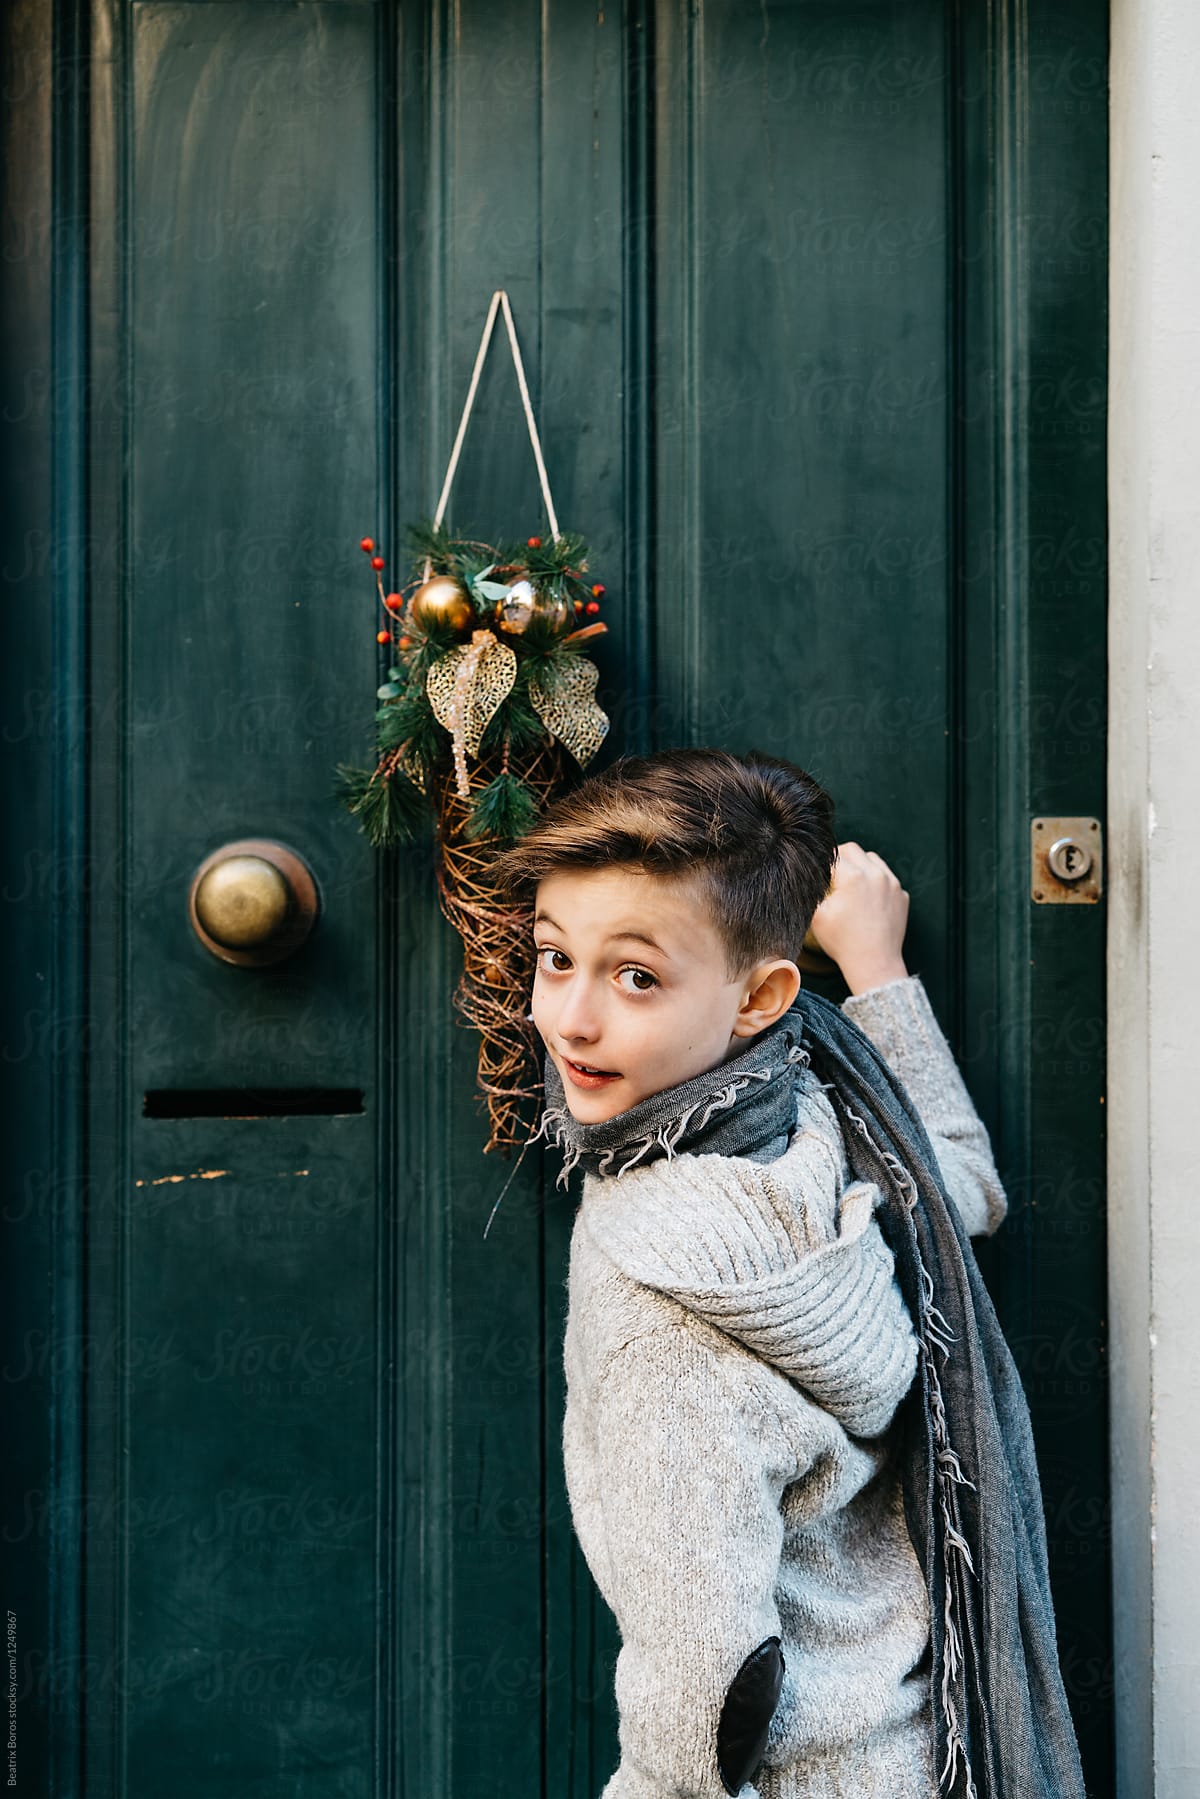 Boy knocking on a decorated door, while curiously looks back to camera